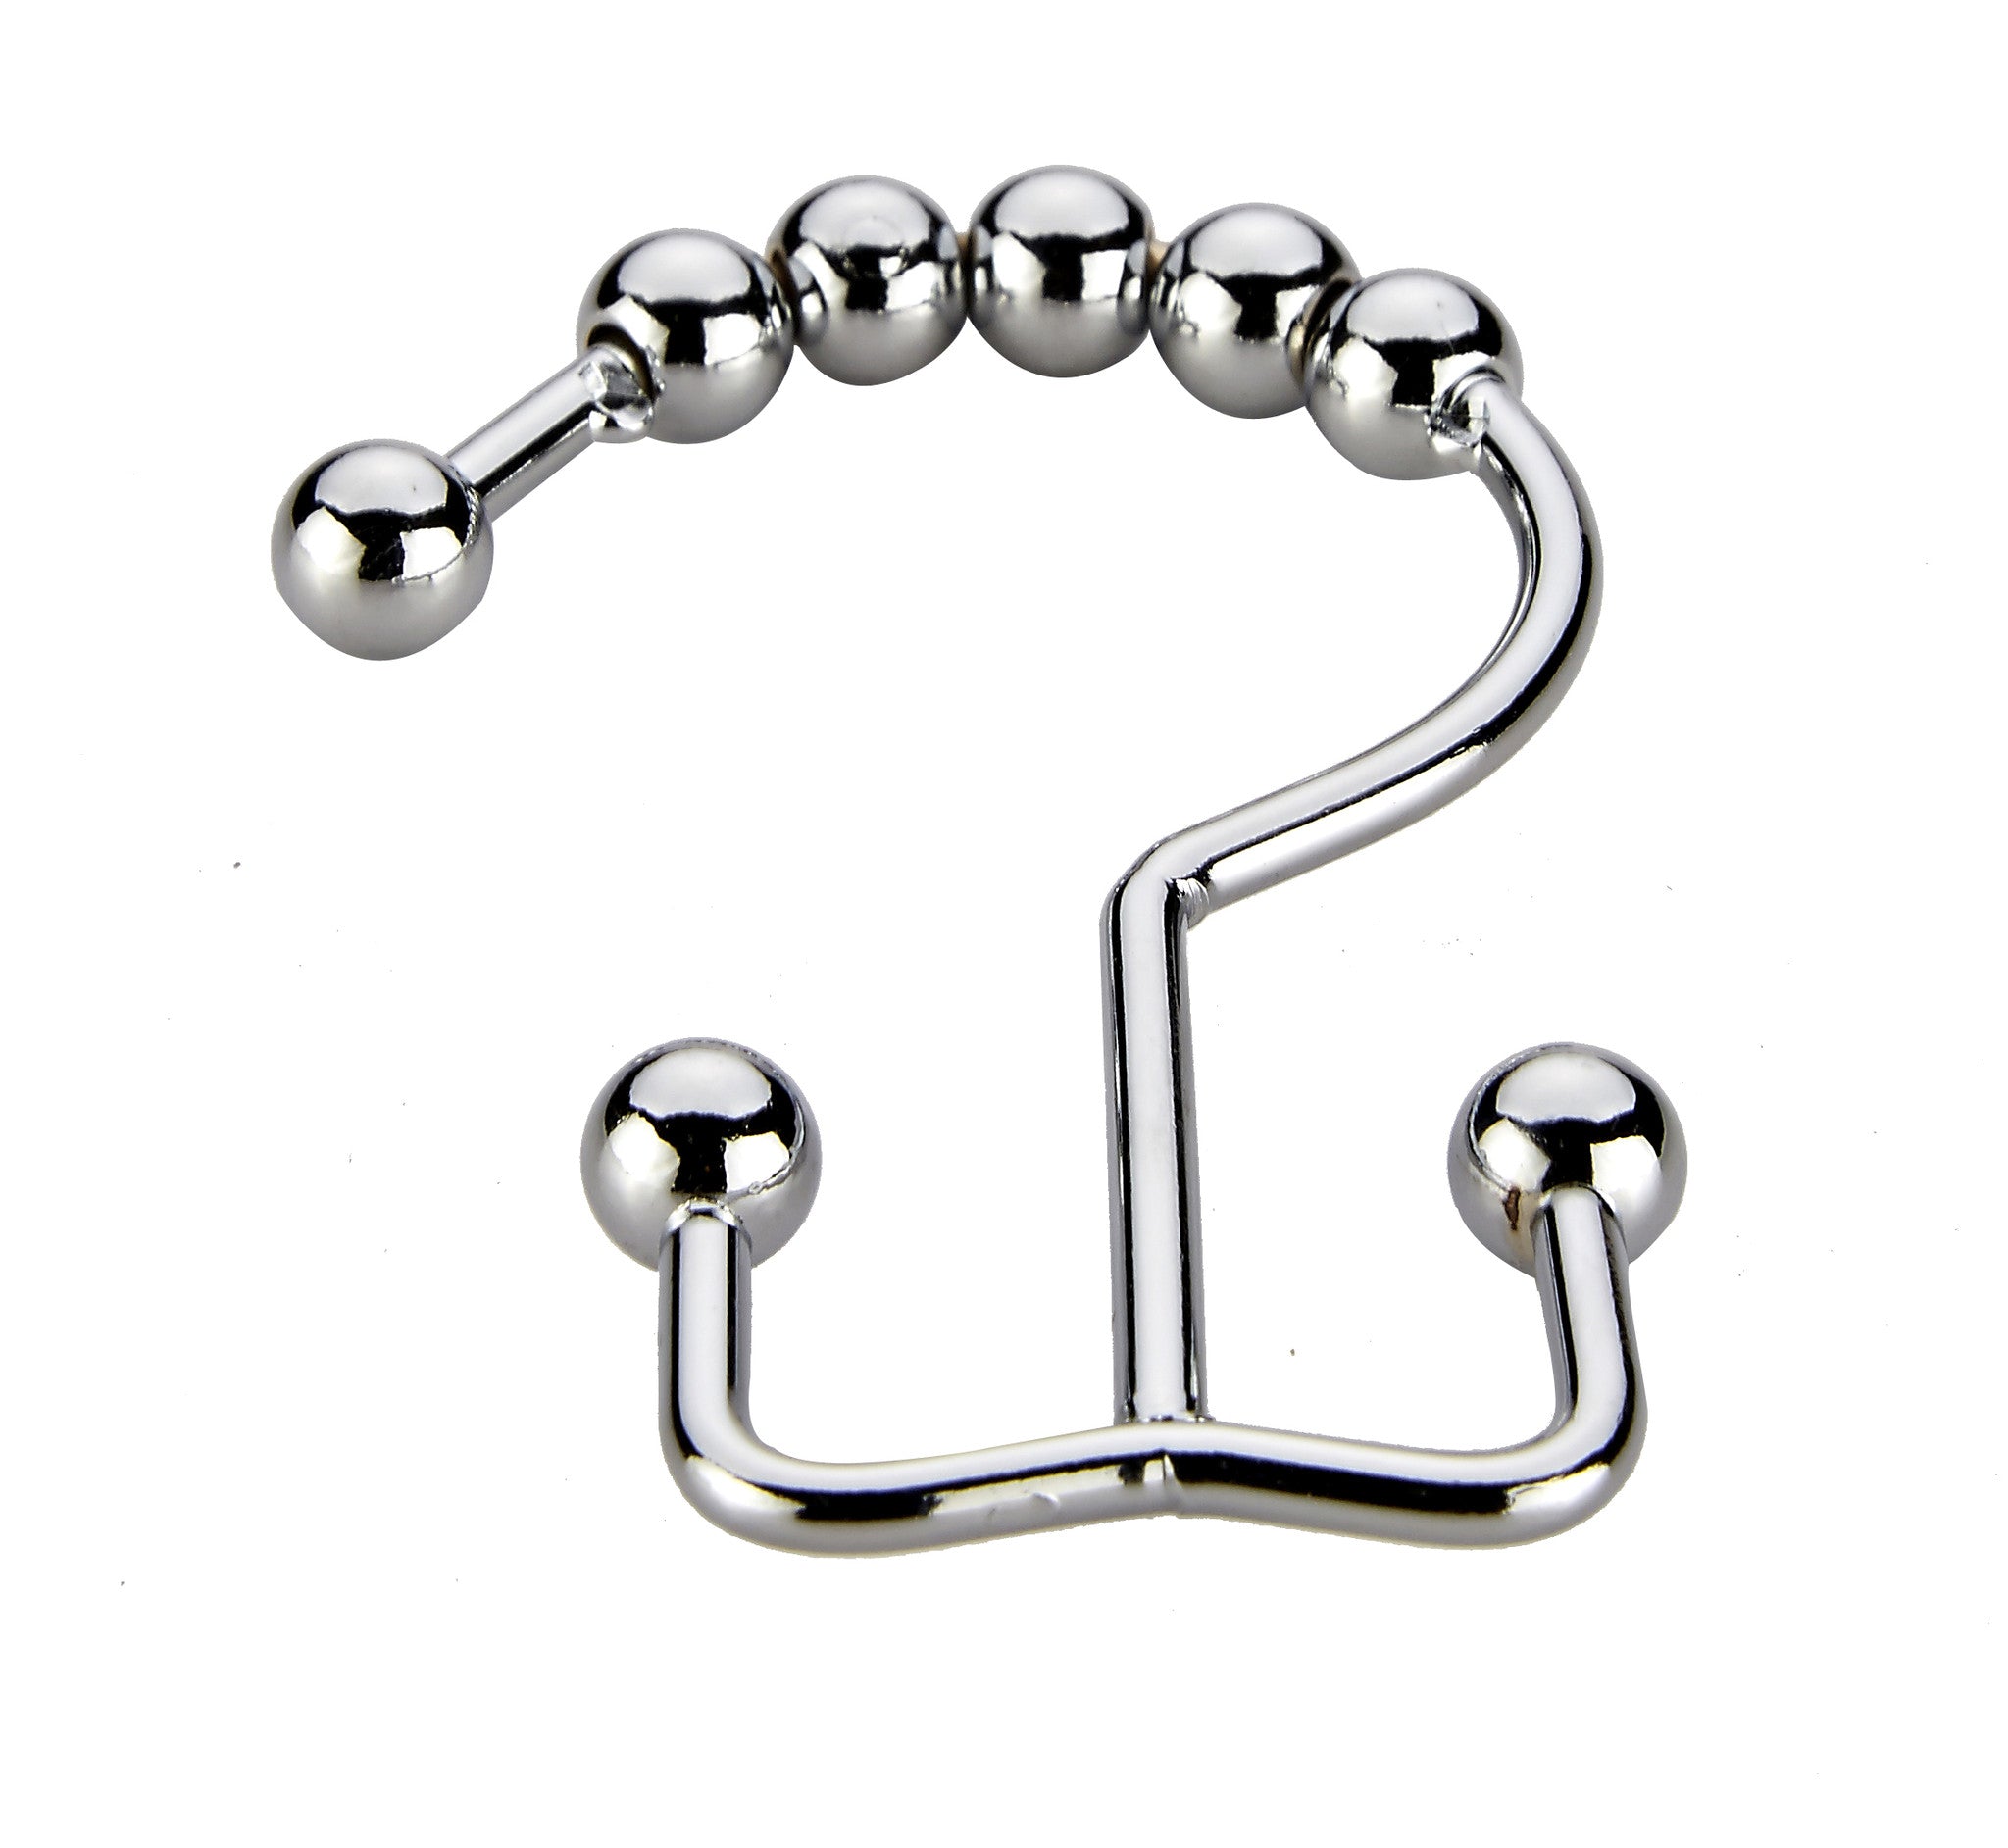 Shower Curtain Rings -12 Pack Set Of Double Polished Chrome Roller